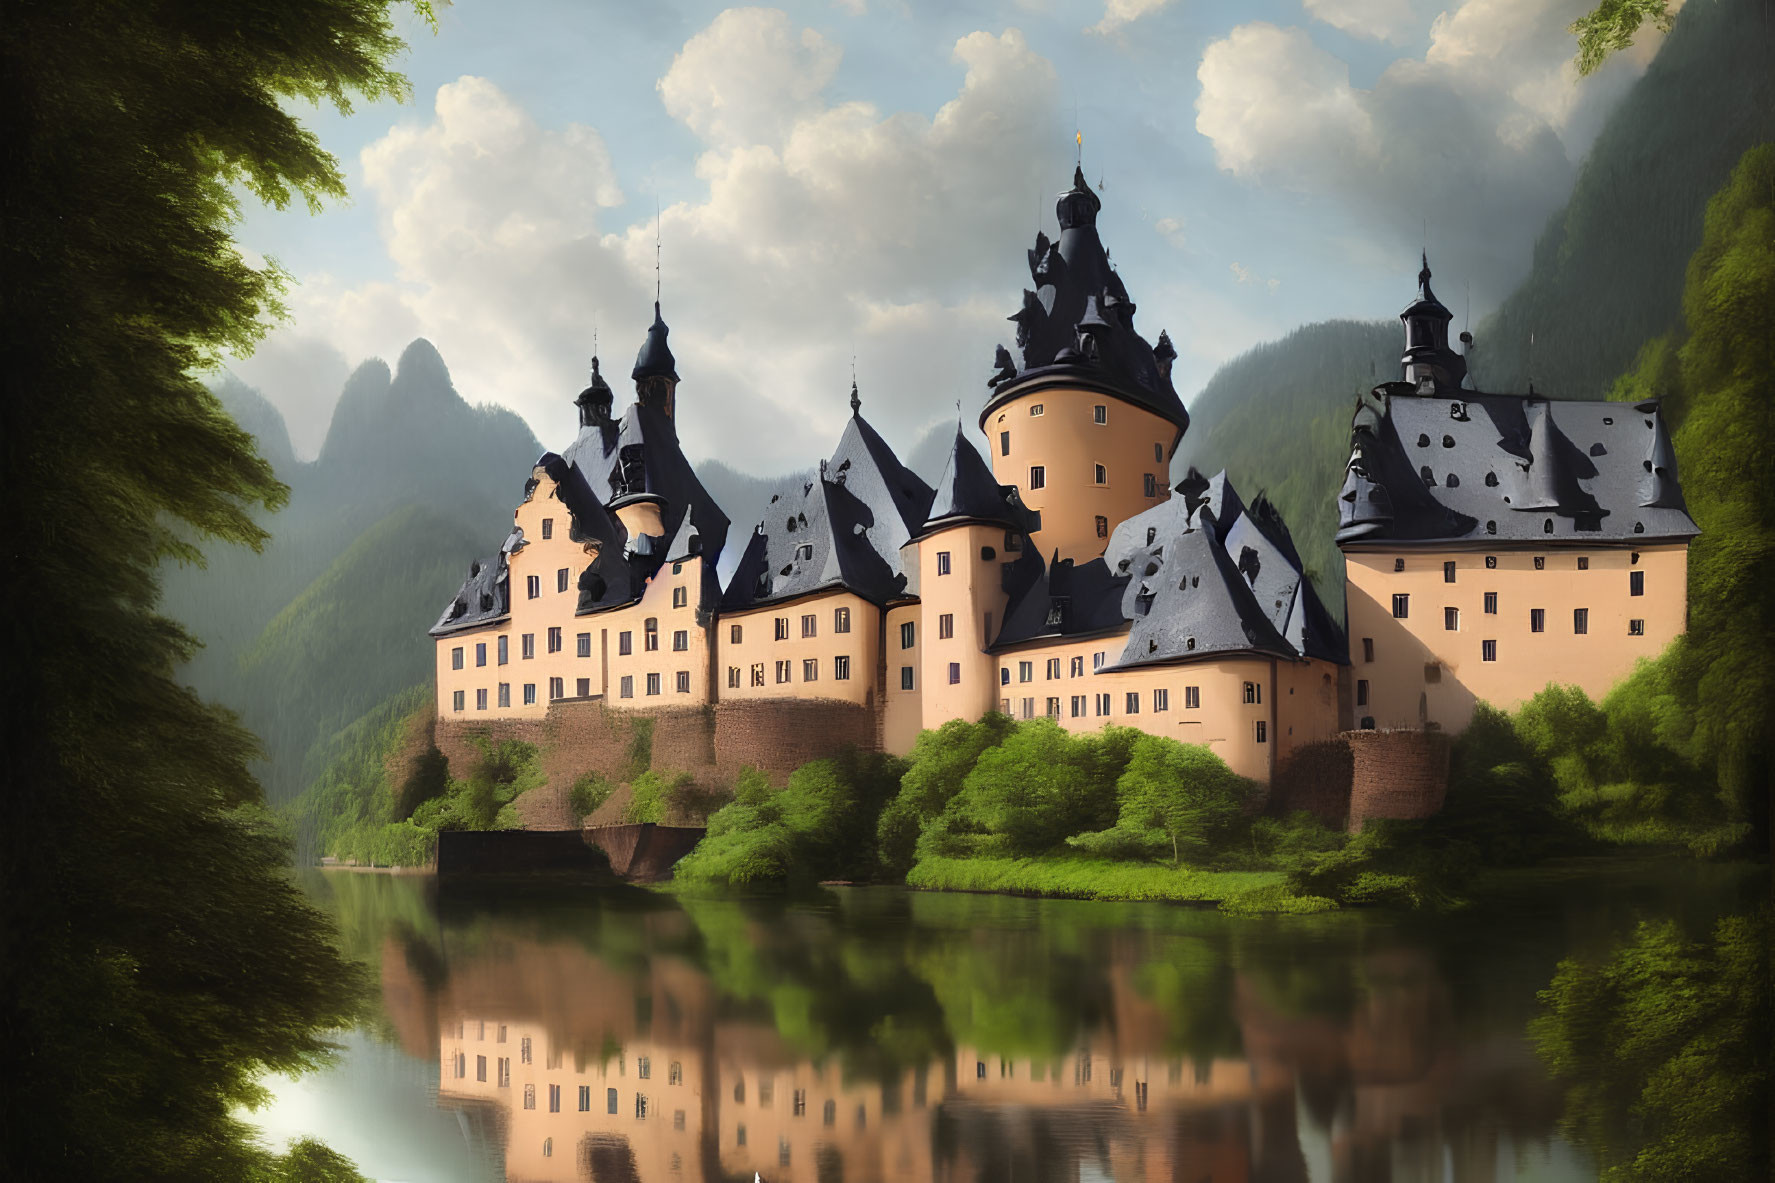 Majestic fairy-tale castle with spires in lush greenery, reflected in lake, mountains